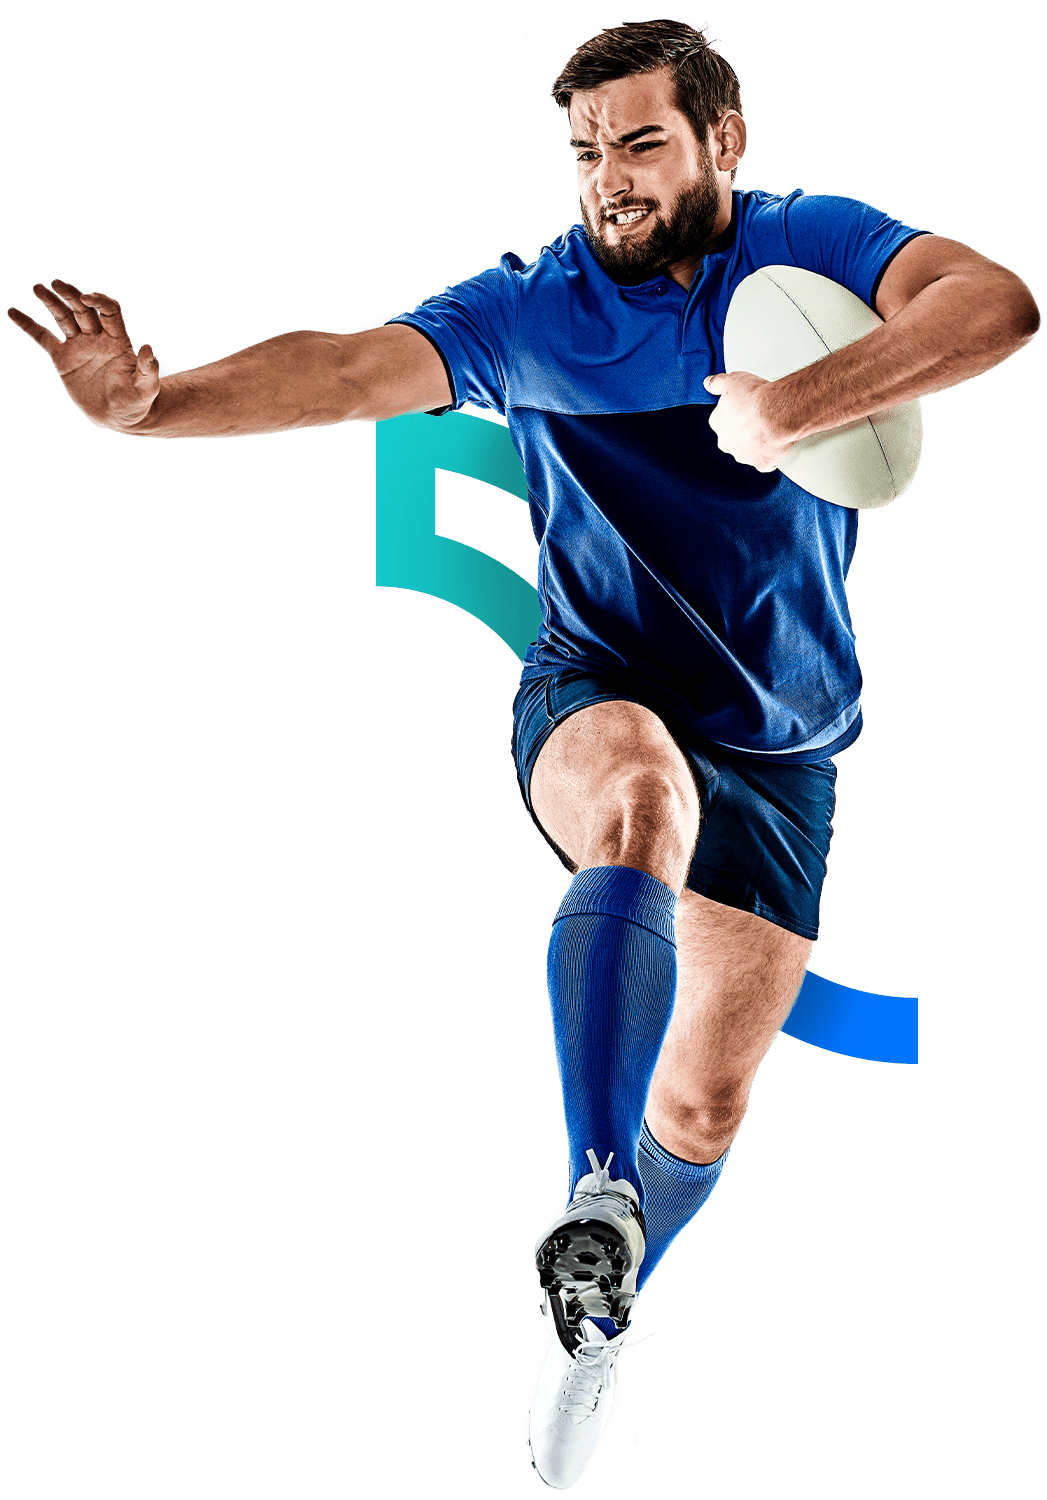 In the picture, a male rugby player holding the rugby ball making a gesture to keep the opponents away.